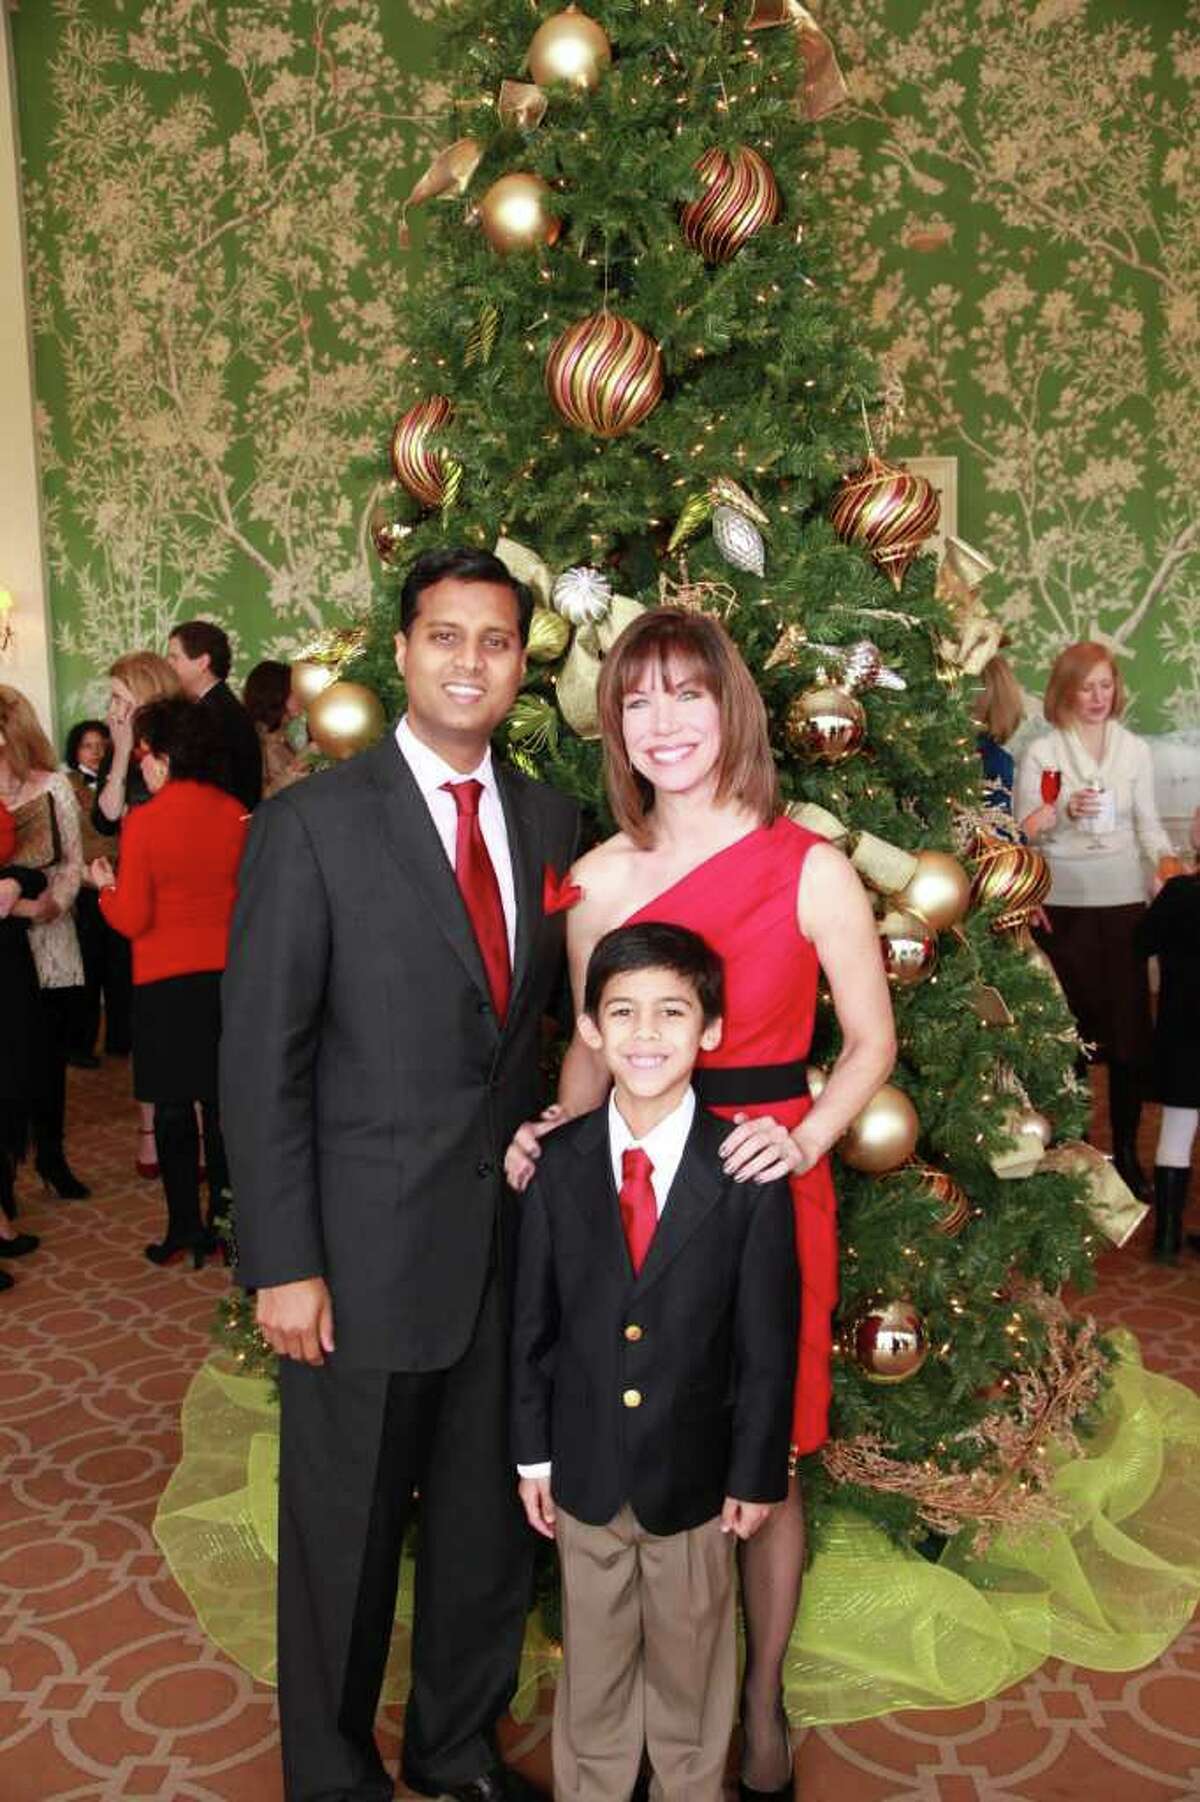 Roseann Rogers, her husband, Dr. Aashish Shah, and son Nikhil chaired A Cardinal's Christmas luncheon benefiting Catholic Charities.